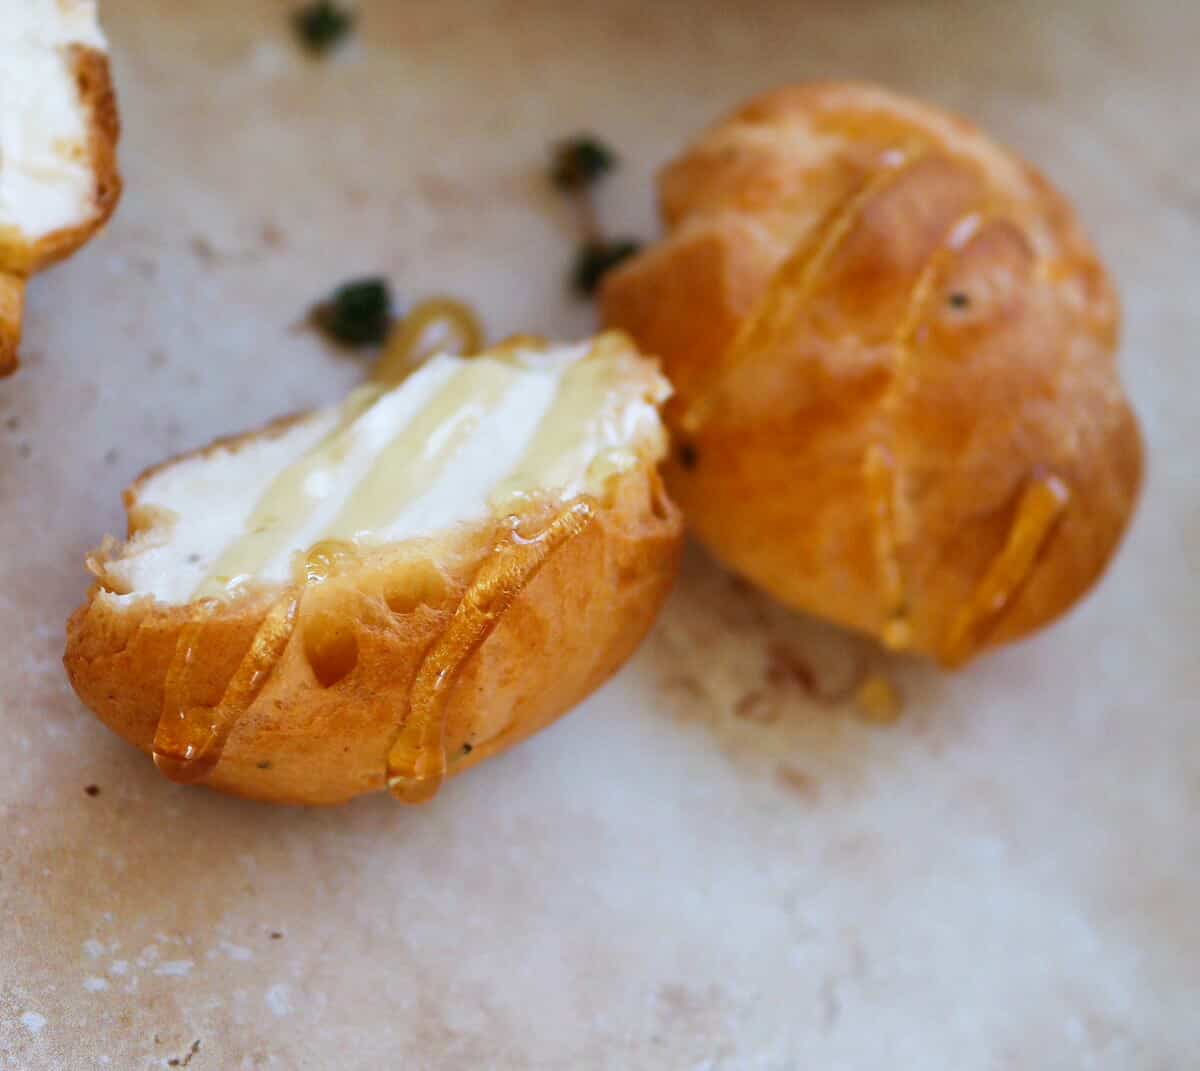 a savoury profiterole cut in half and drizzled with honey